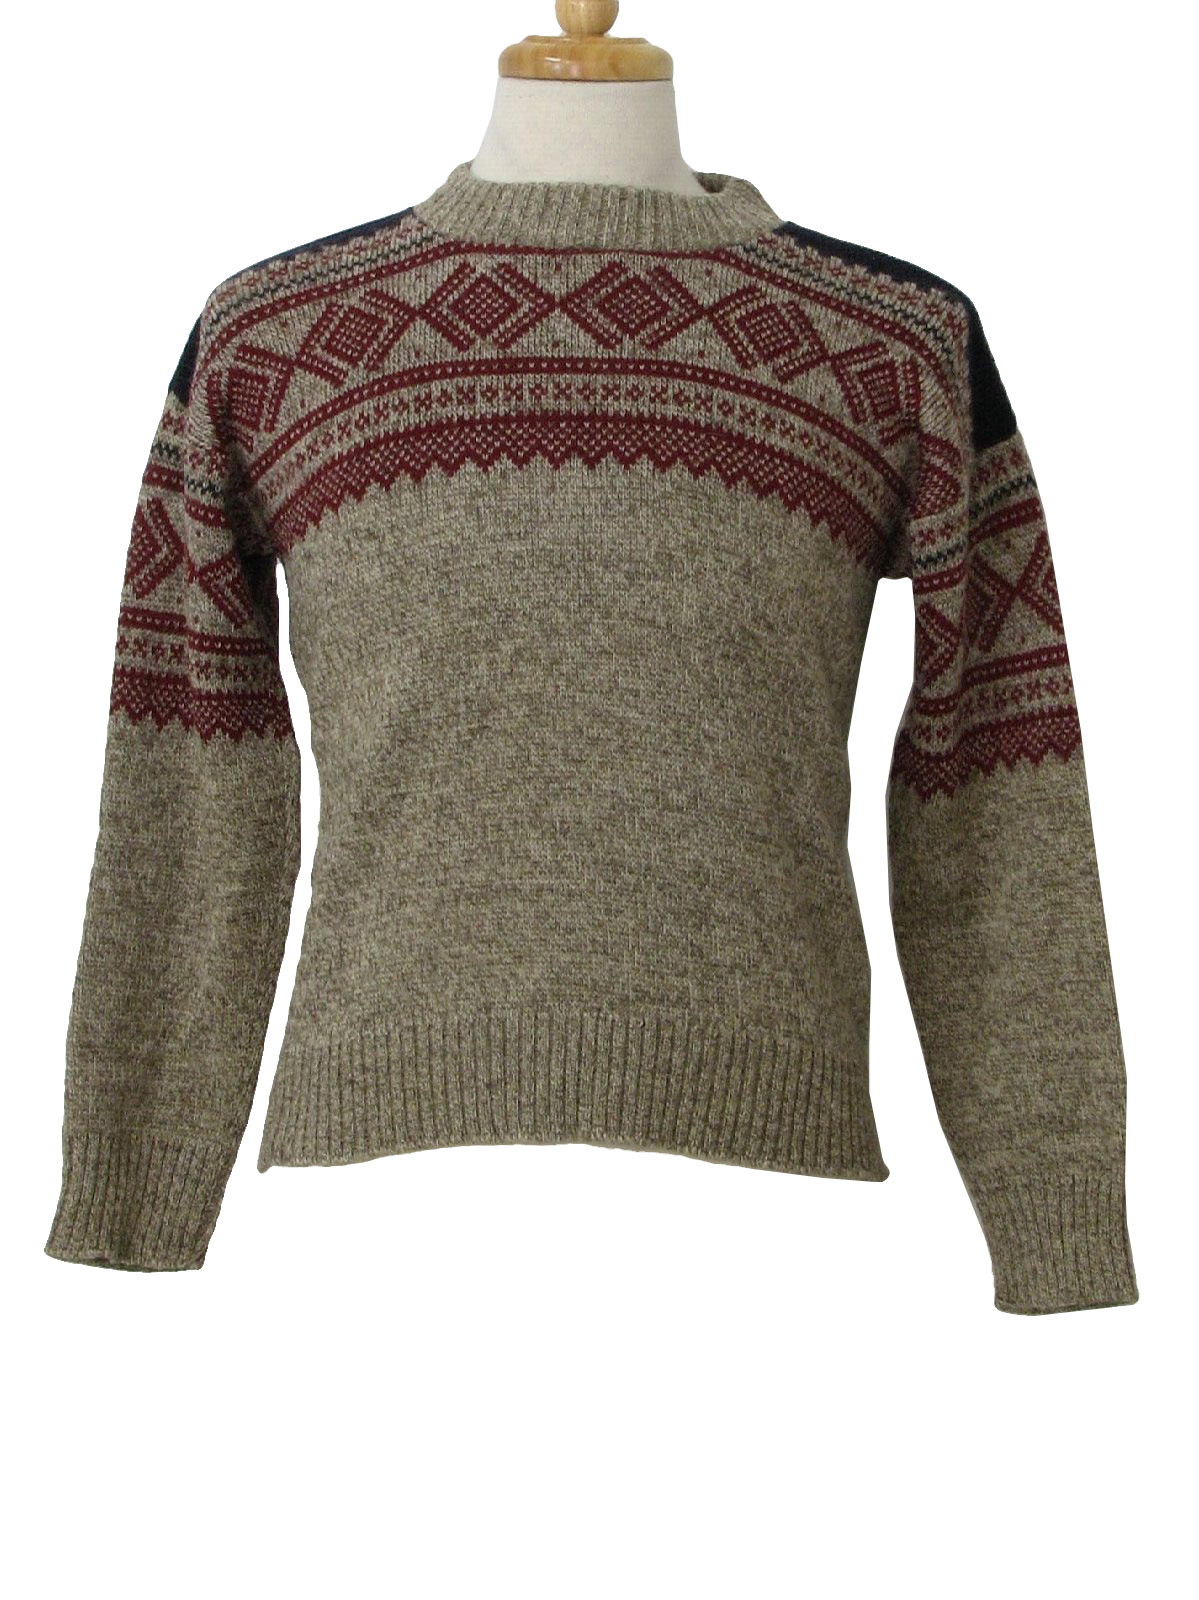 Retro 1980s Sweater: 80s -The Worlds Best- Mens or Boys oatmeal grey ...